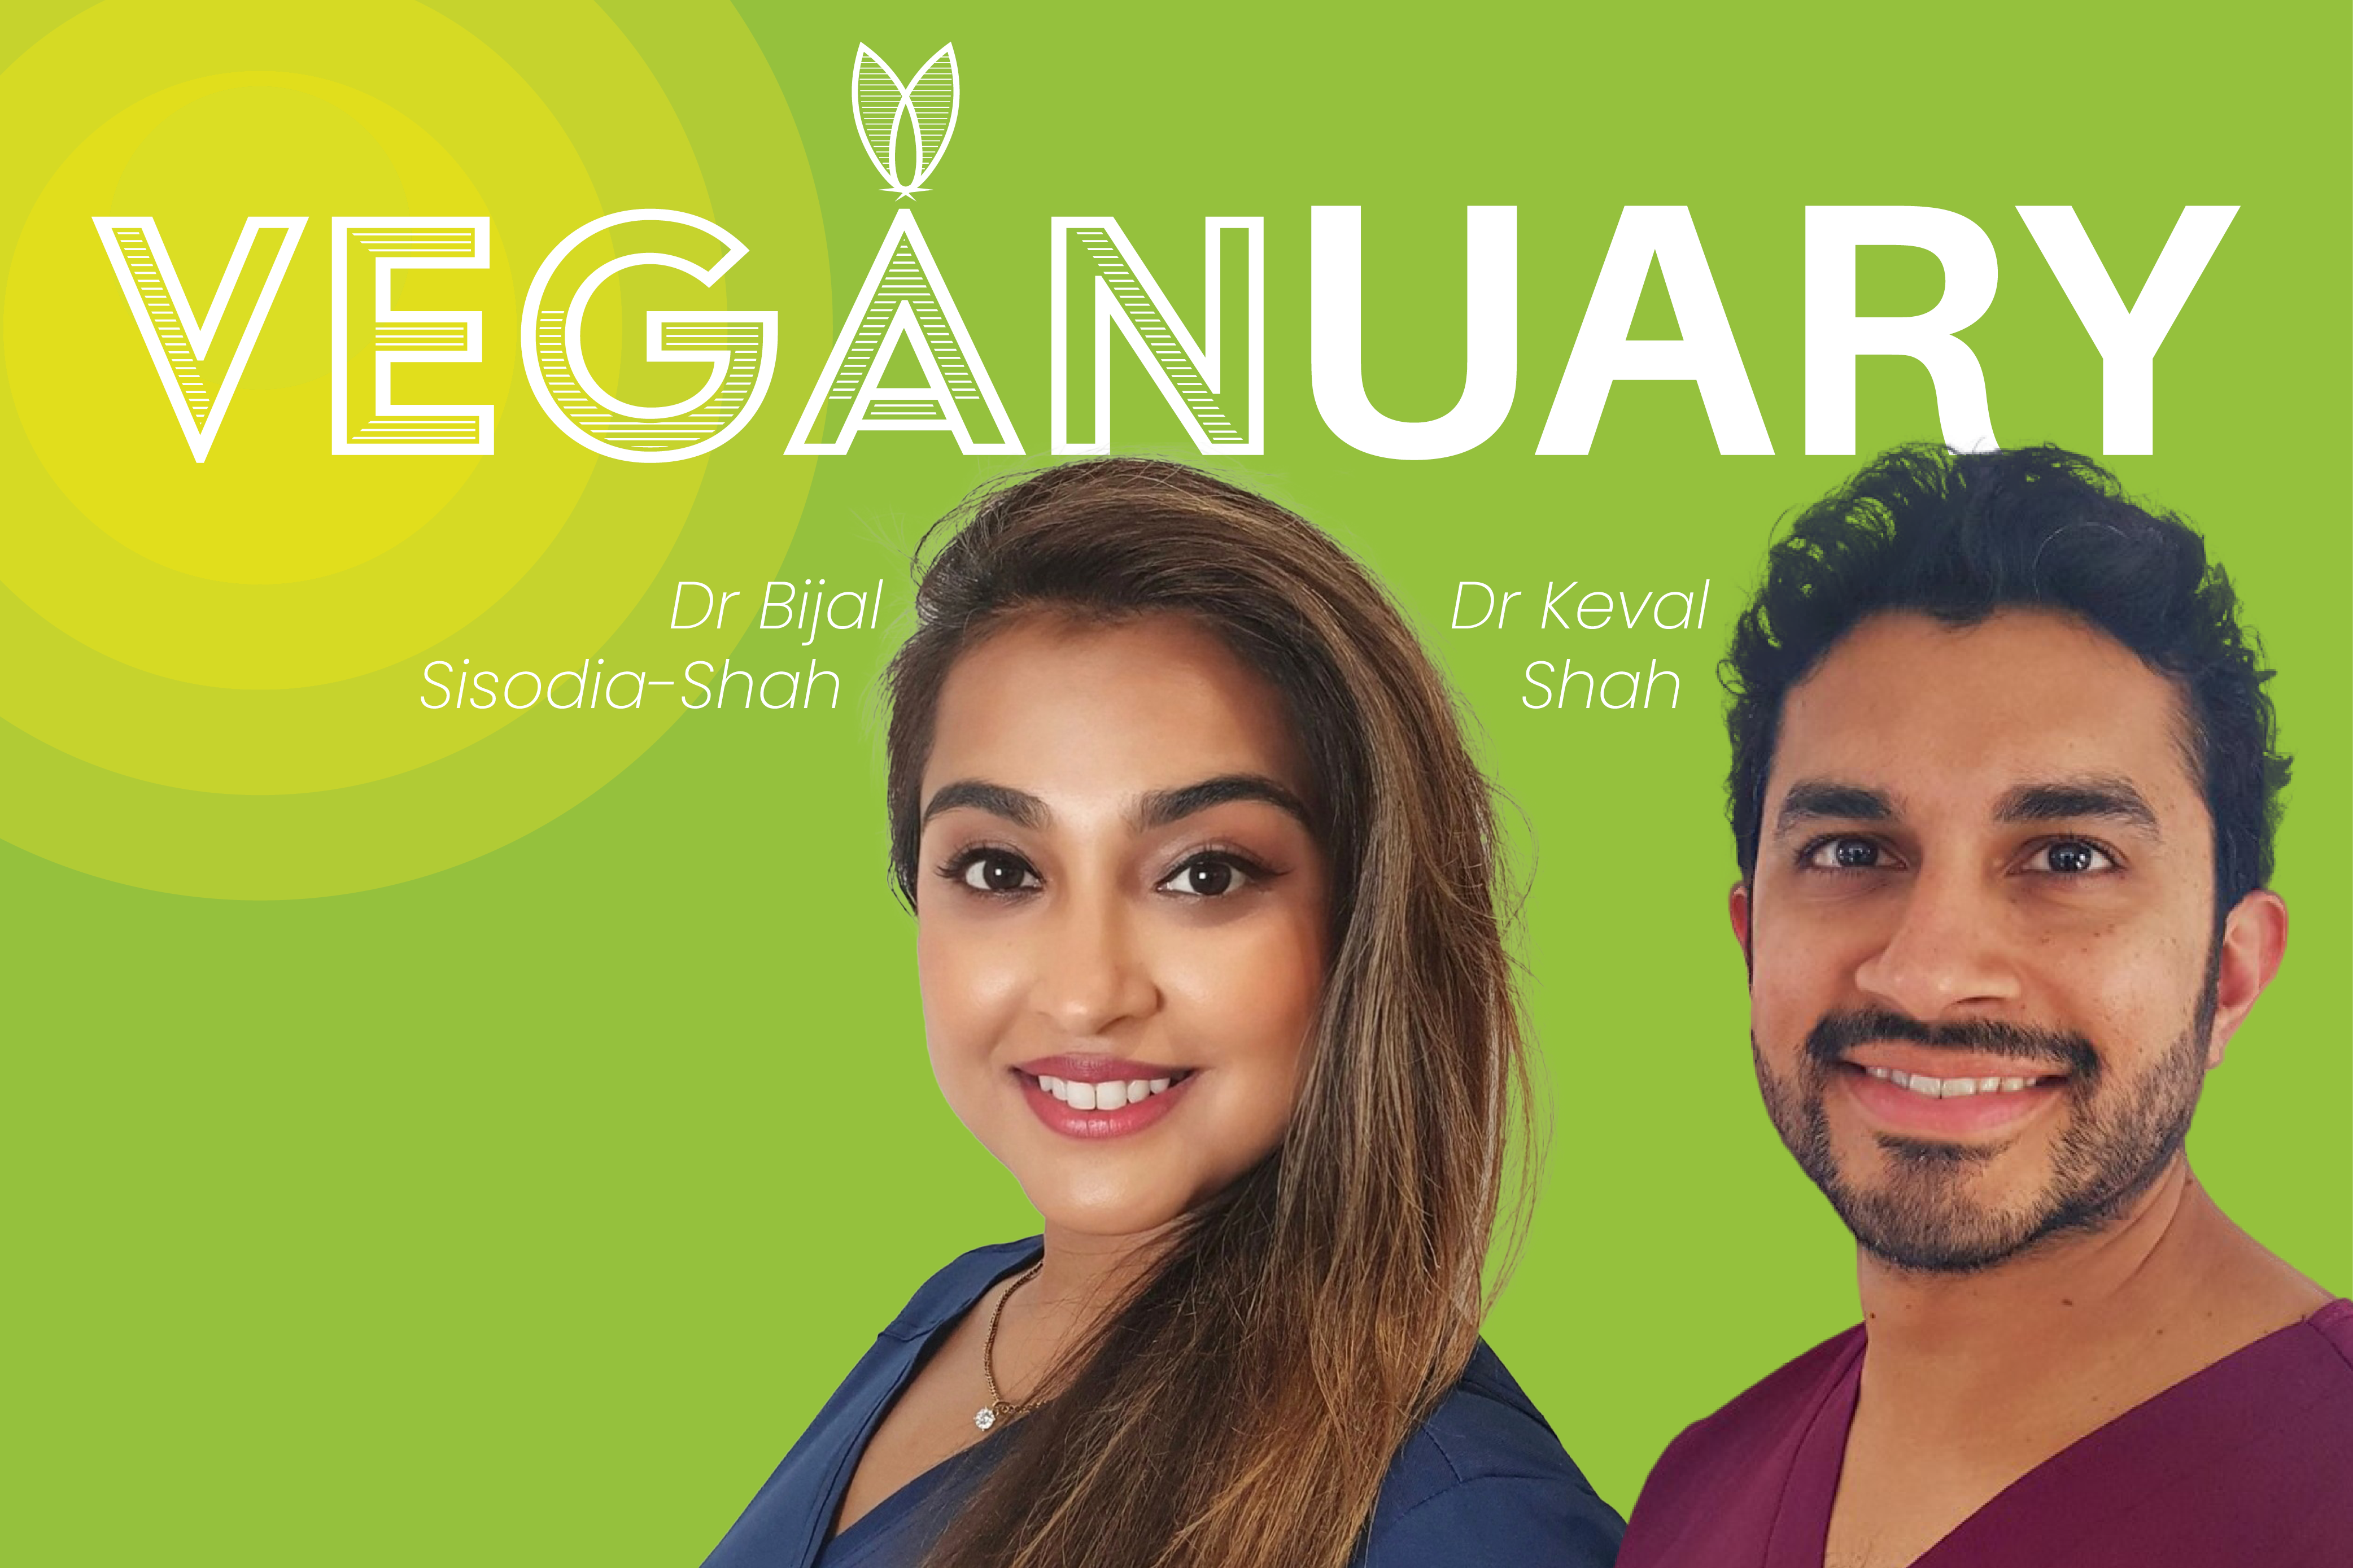 Plant-based eating and dentistry - adapting to a changing world